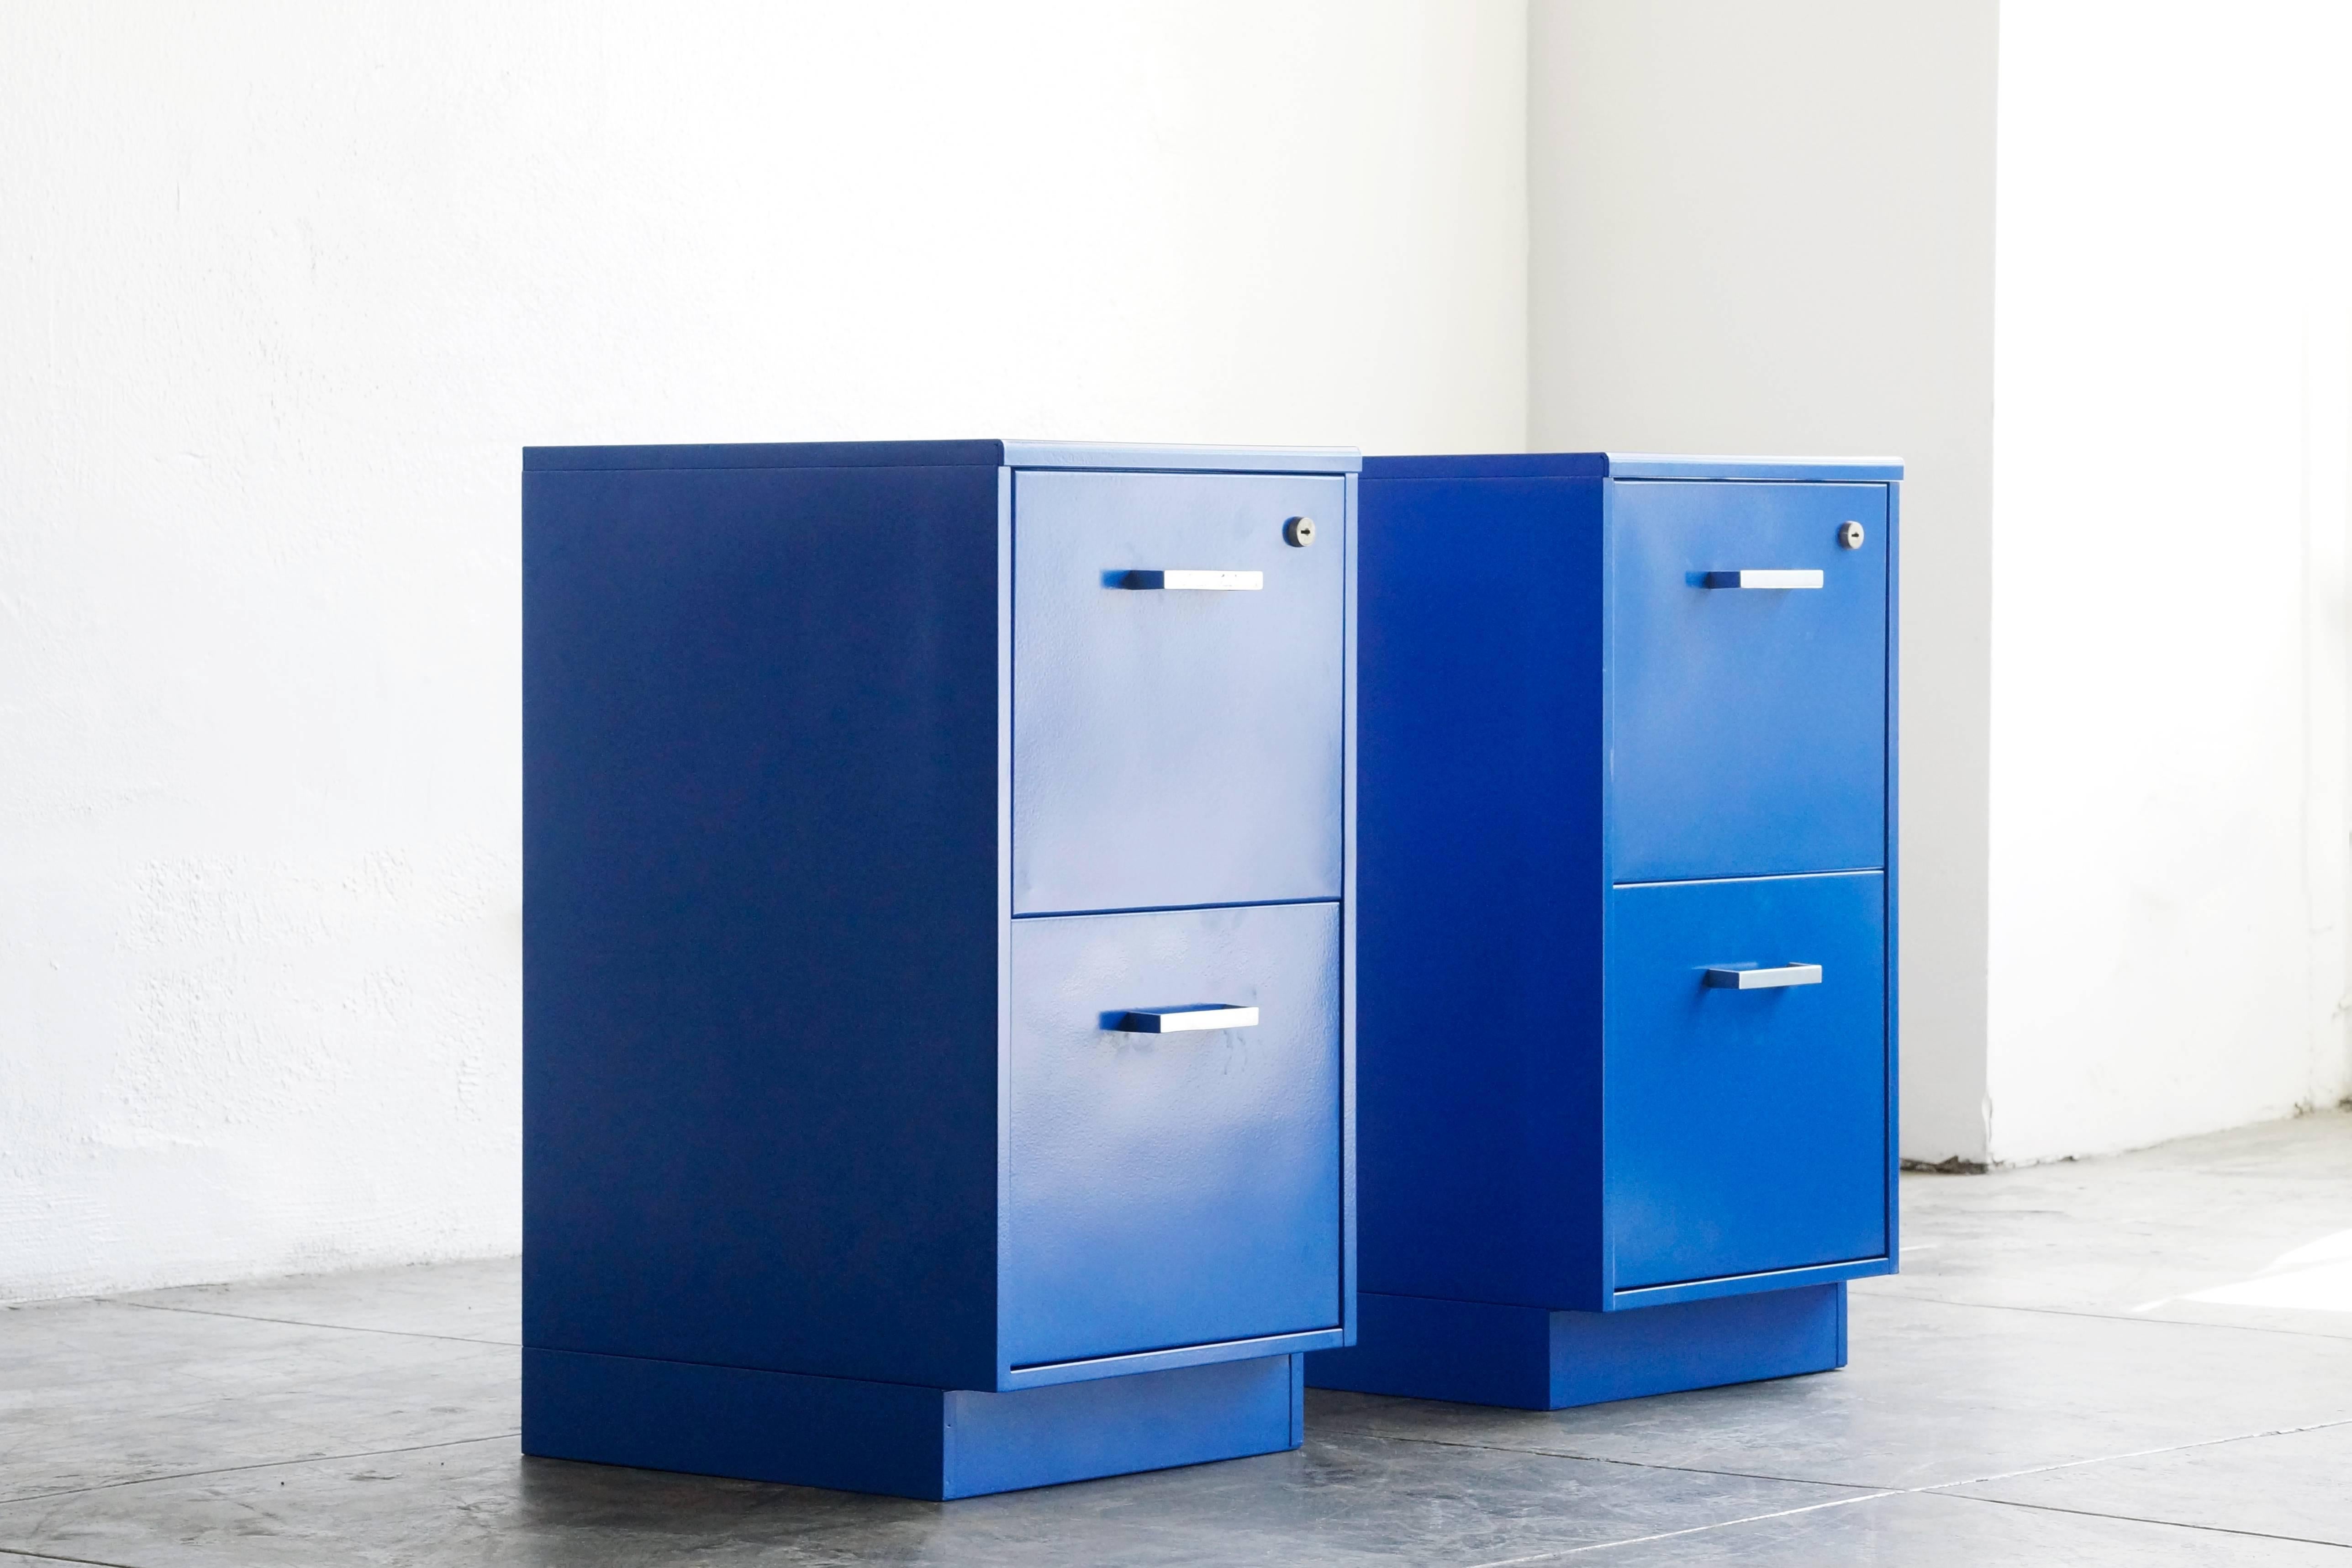 Vintage 1970s Steelcase file cabinets refinished in a satin blue powder coat. Getting organized never looked so good.

Priced individually. $650 each or $1100 for the pair. 

Dimensions: 18